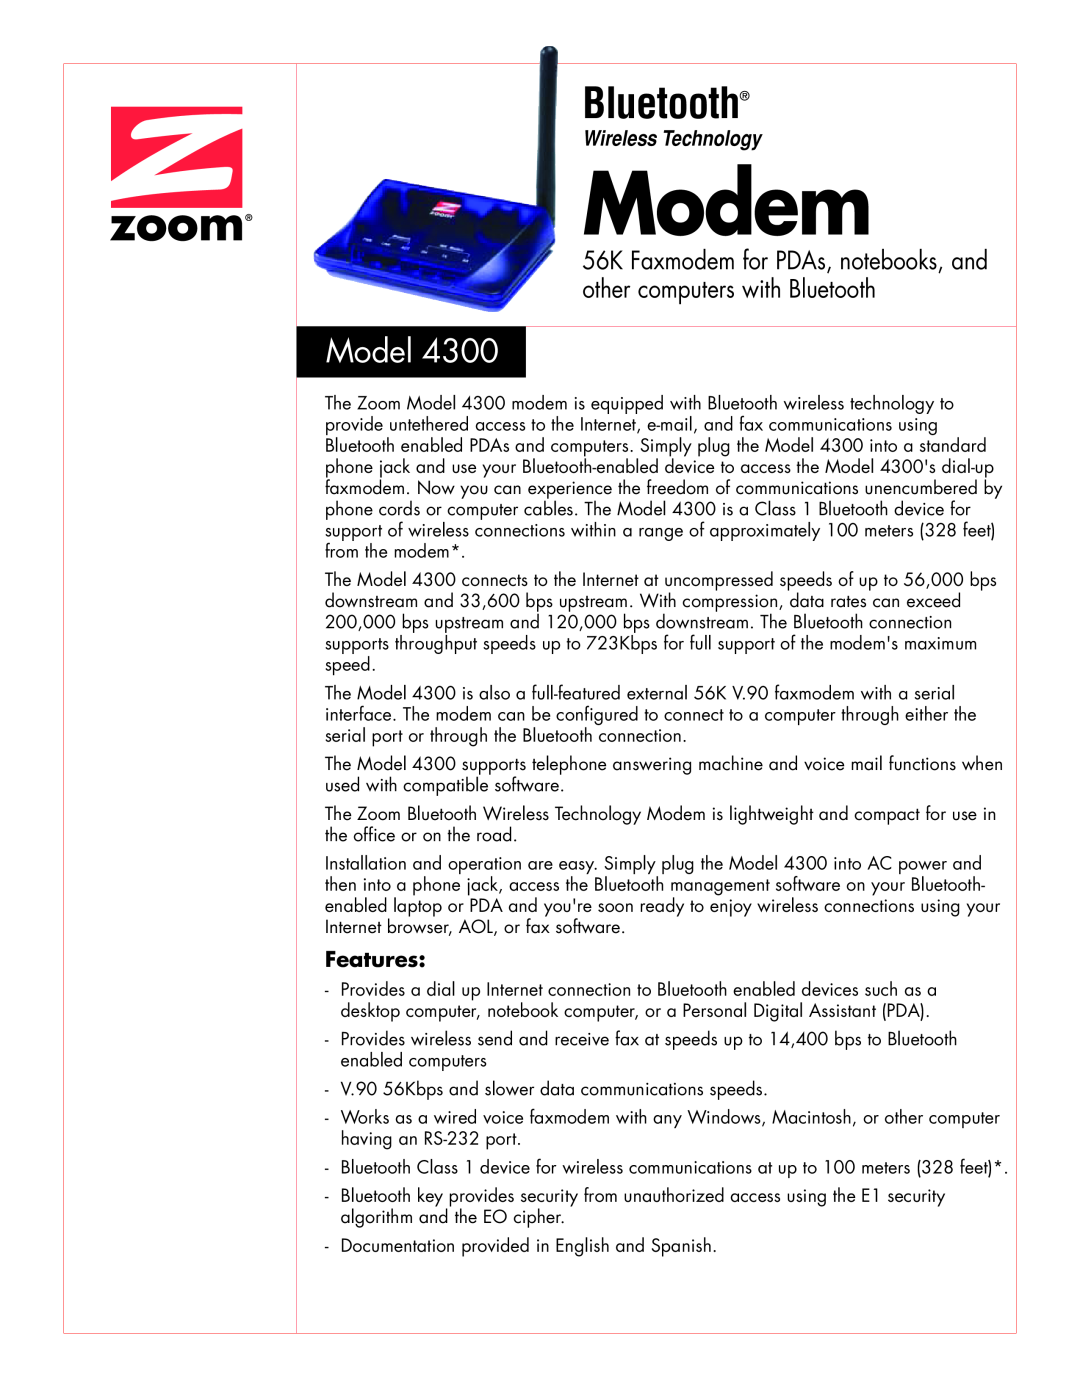 Zoom 4300 manual Modem, Model, 56K Faxmodem for PDAs, notebooks, and other computers with Bluetooth, Features 